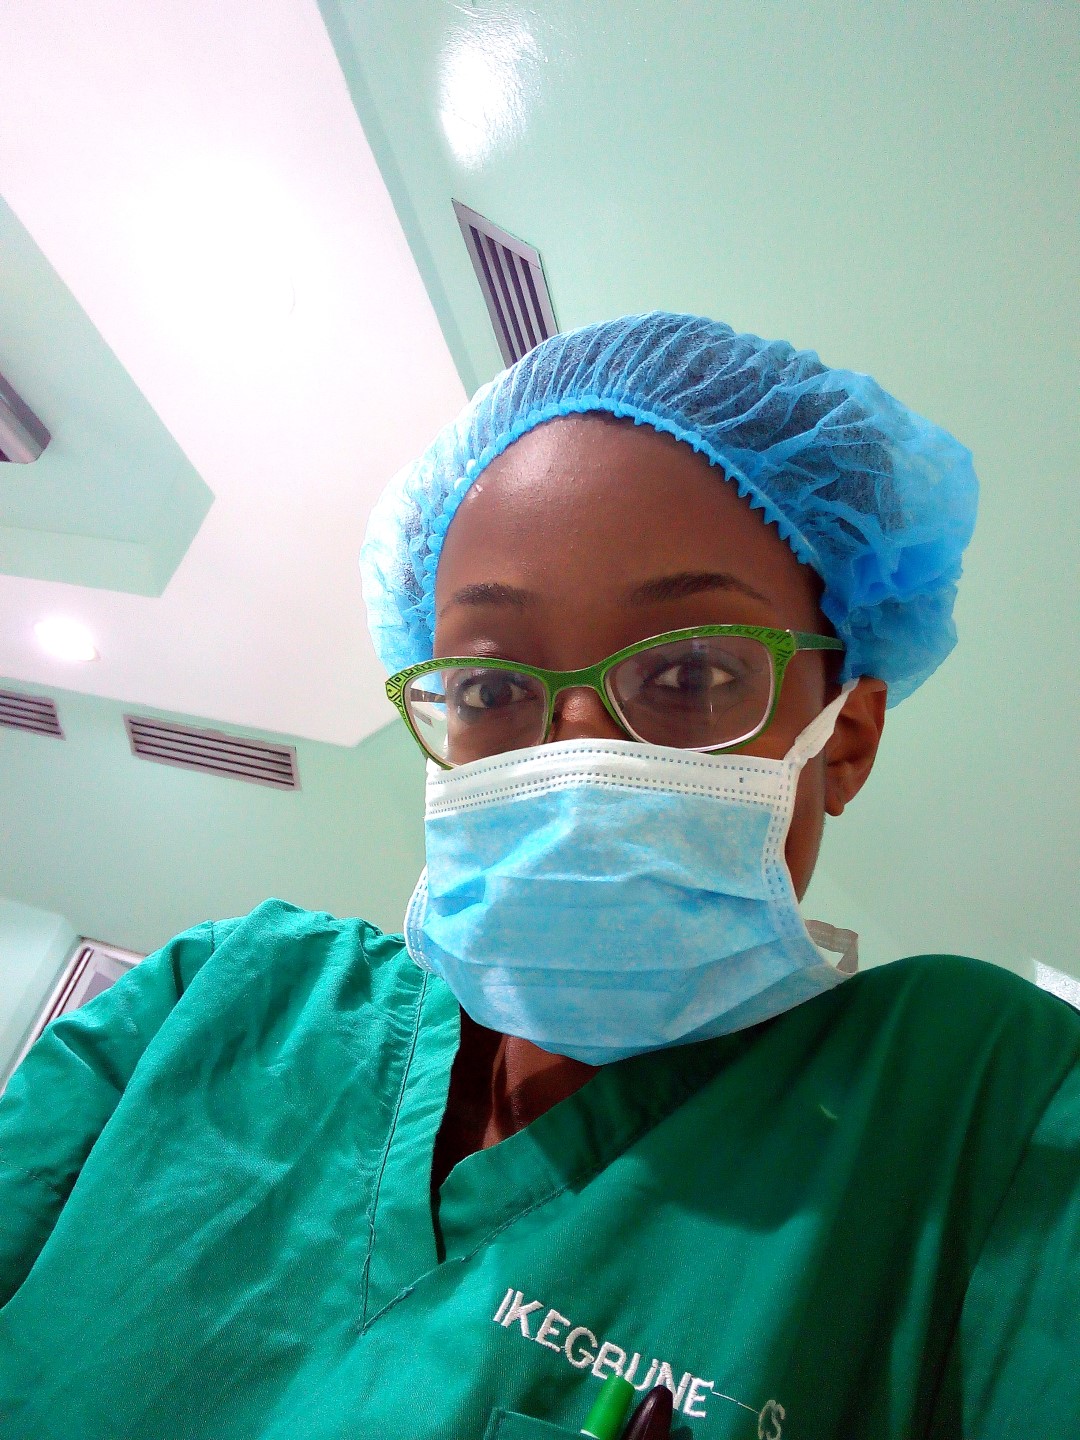 housemanship in nigeria, Blogger and Medical doctor cassie daves selfie in face mask and head cover for theatre